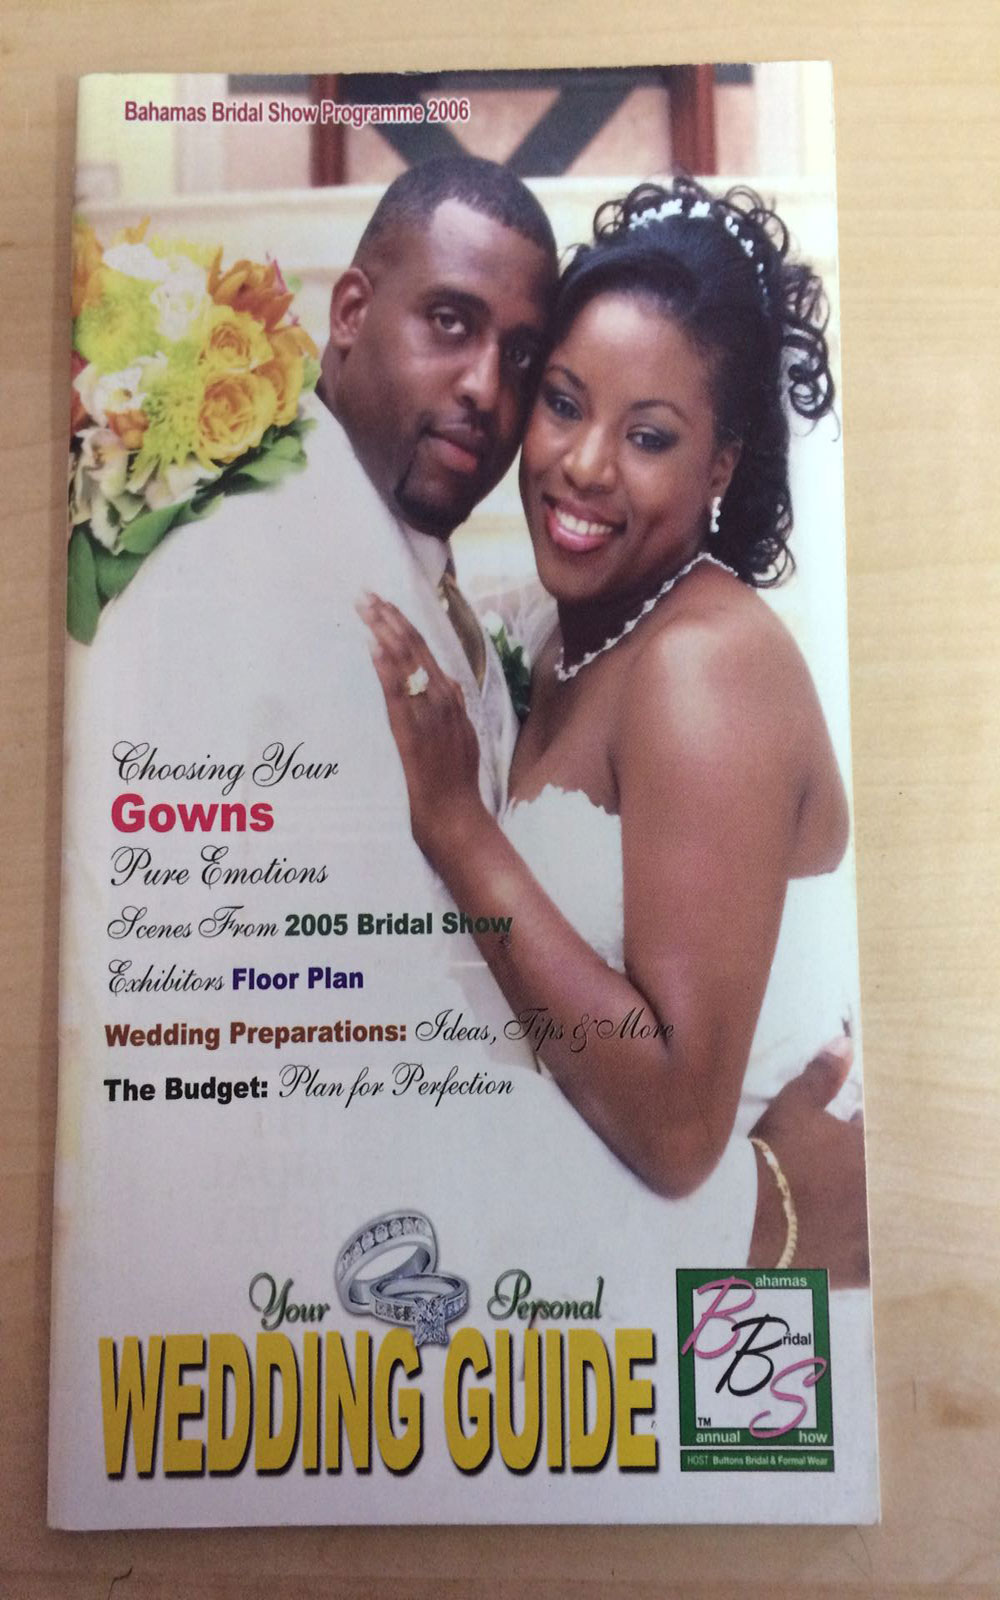 The Wedding Guide 2006